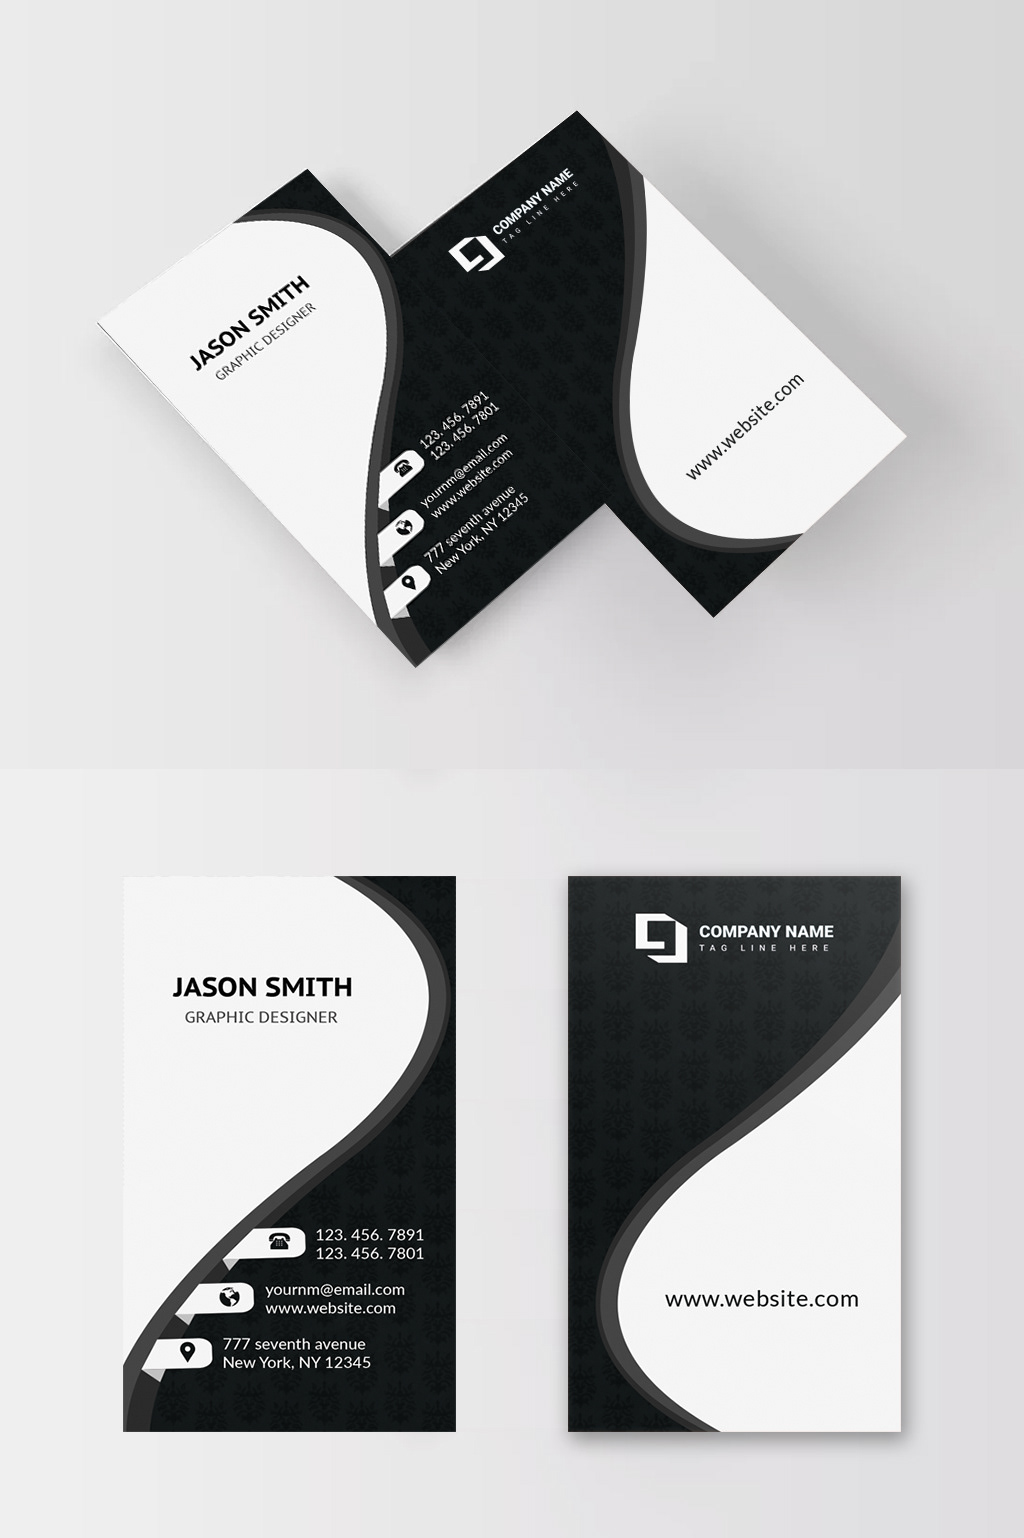 business card graphic template Layout creative modern abstract vector design